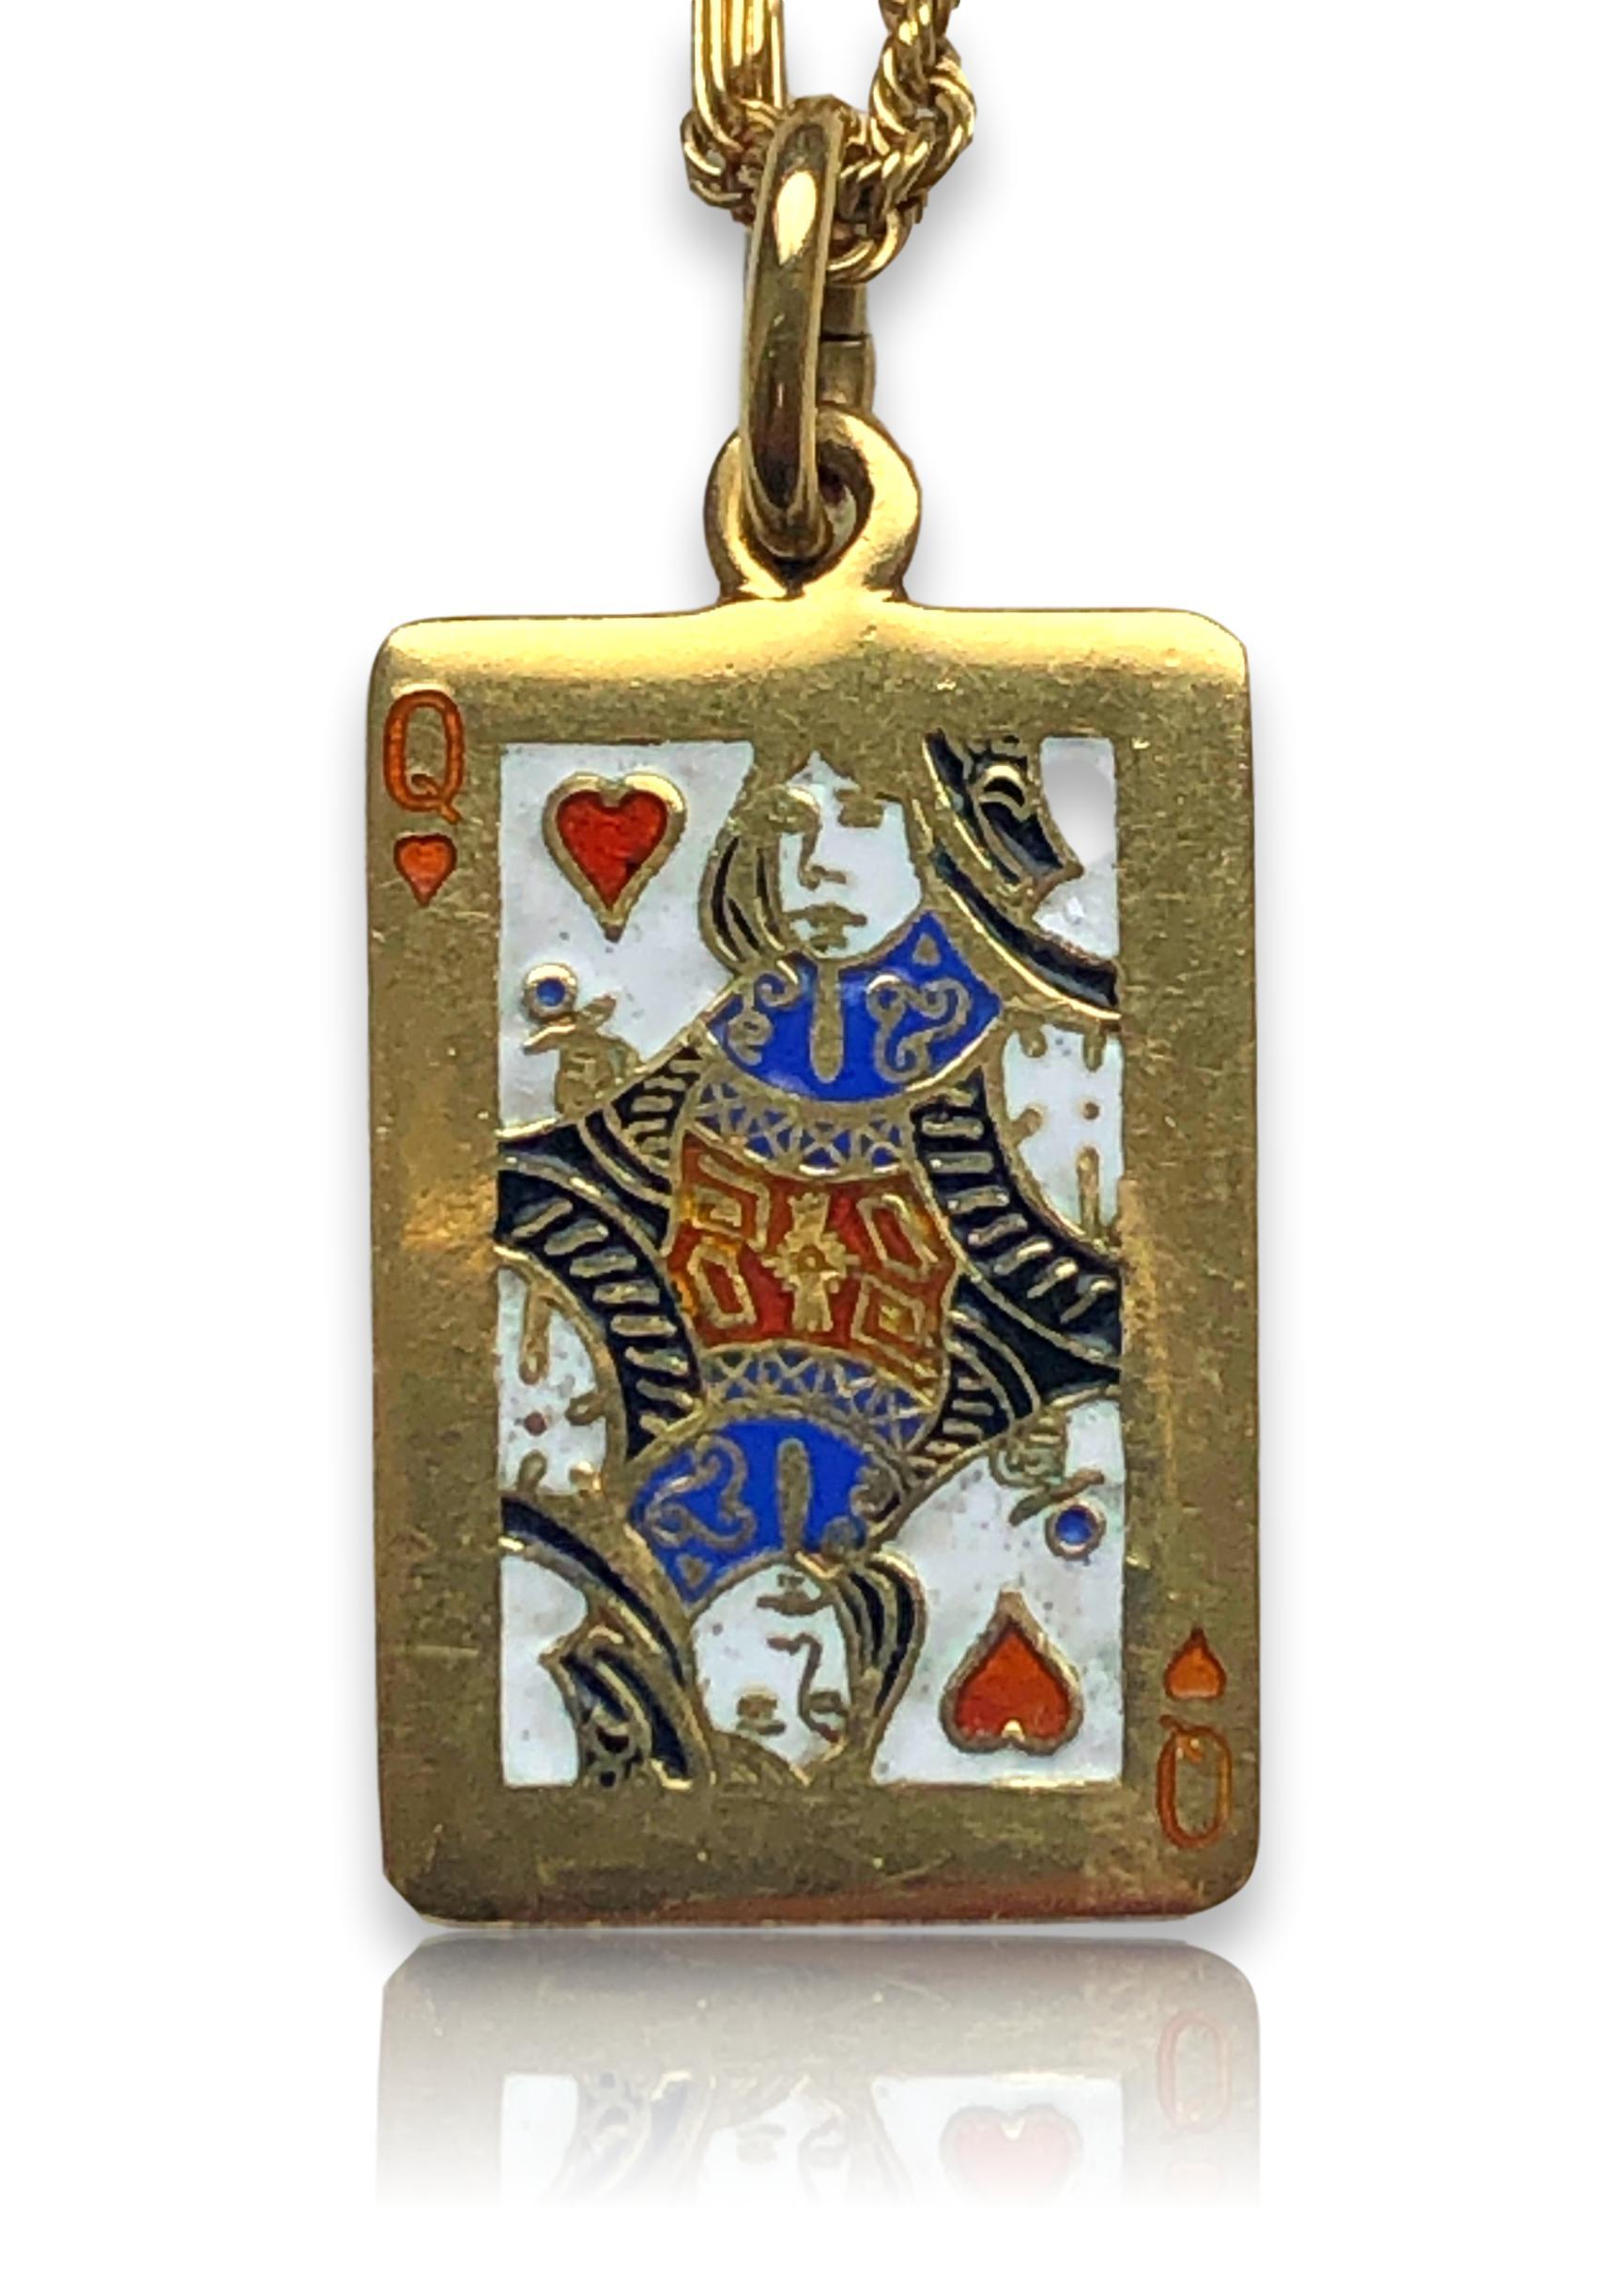 70's Queen of Hearts pendant/charm by Cartier. The 18k Yellow gold and colored enamel 1